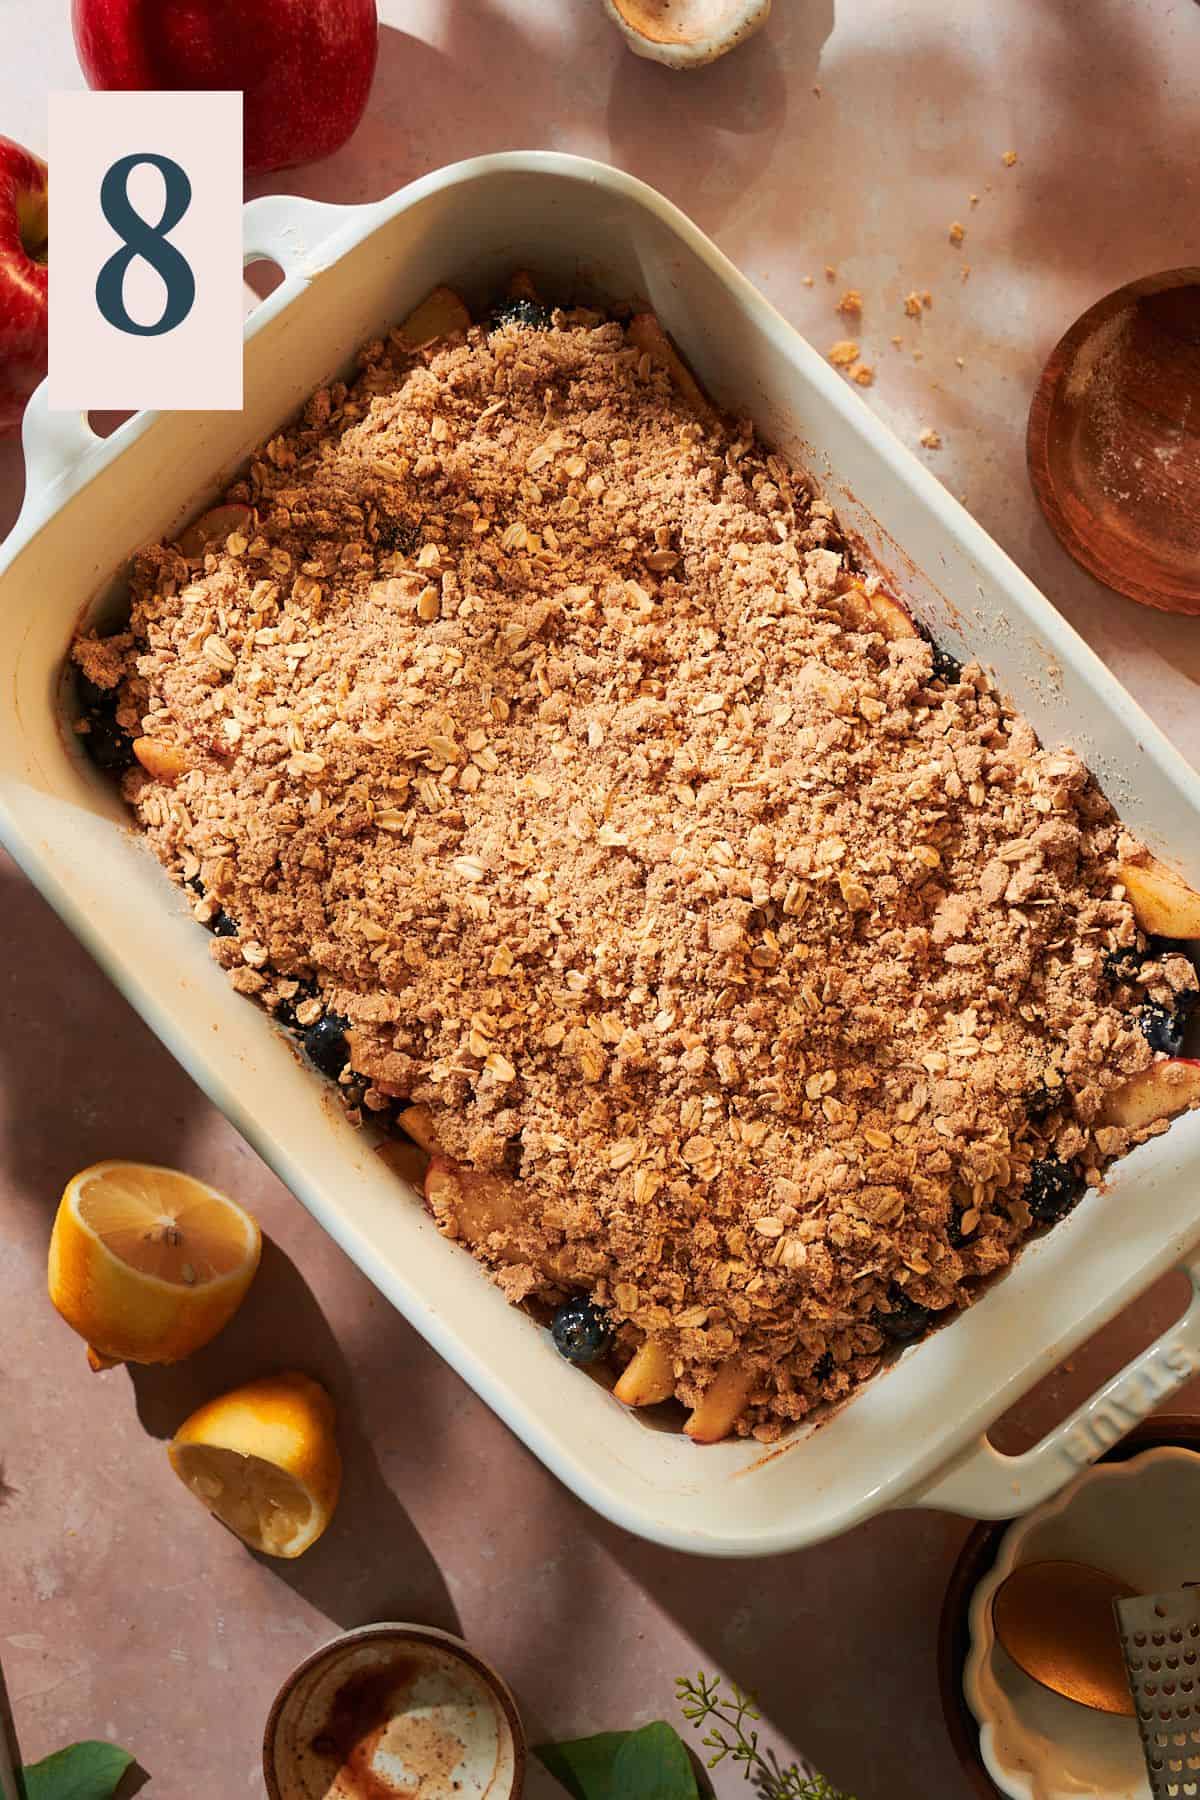 Crispy oat topping covering blueberries and apples in a baking dish before baking. 